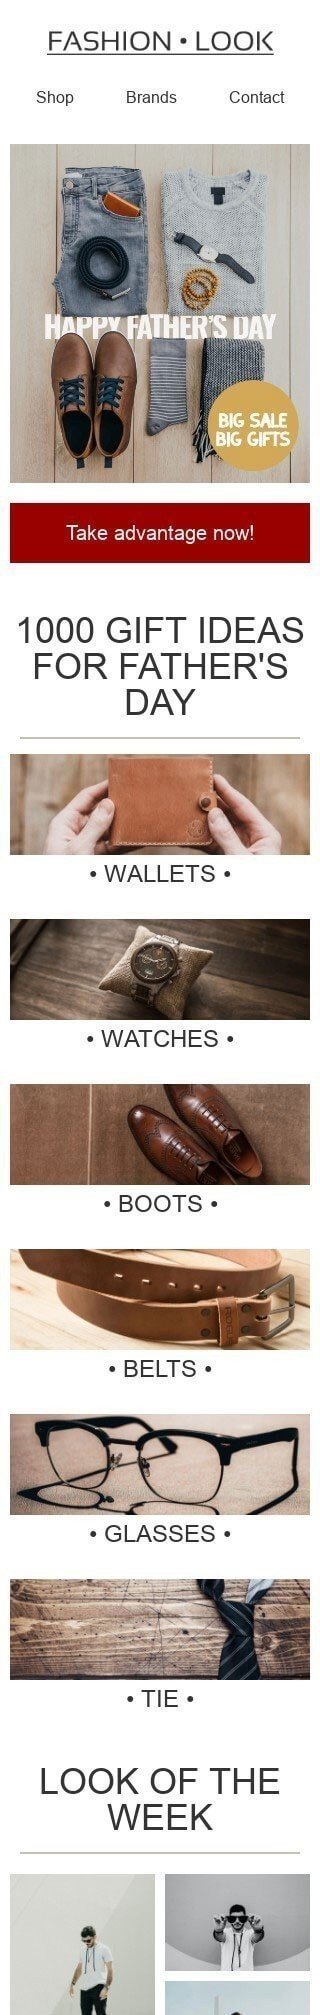 Father’s Day Email Template «Accessories for men» for Fashion industry mobile view